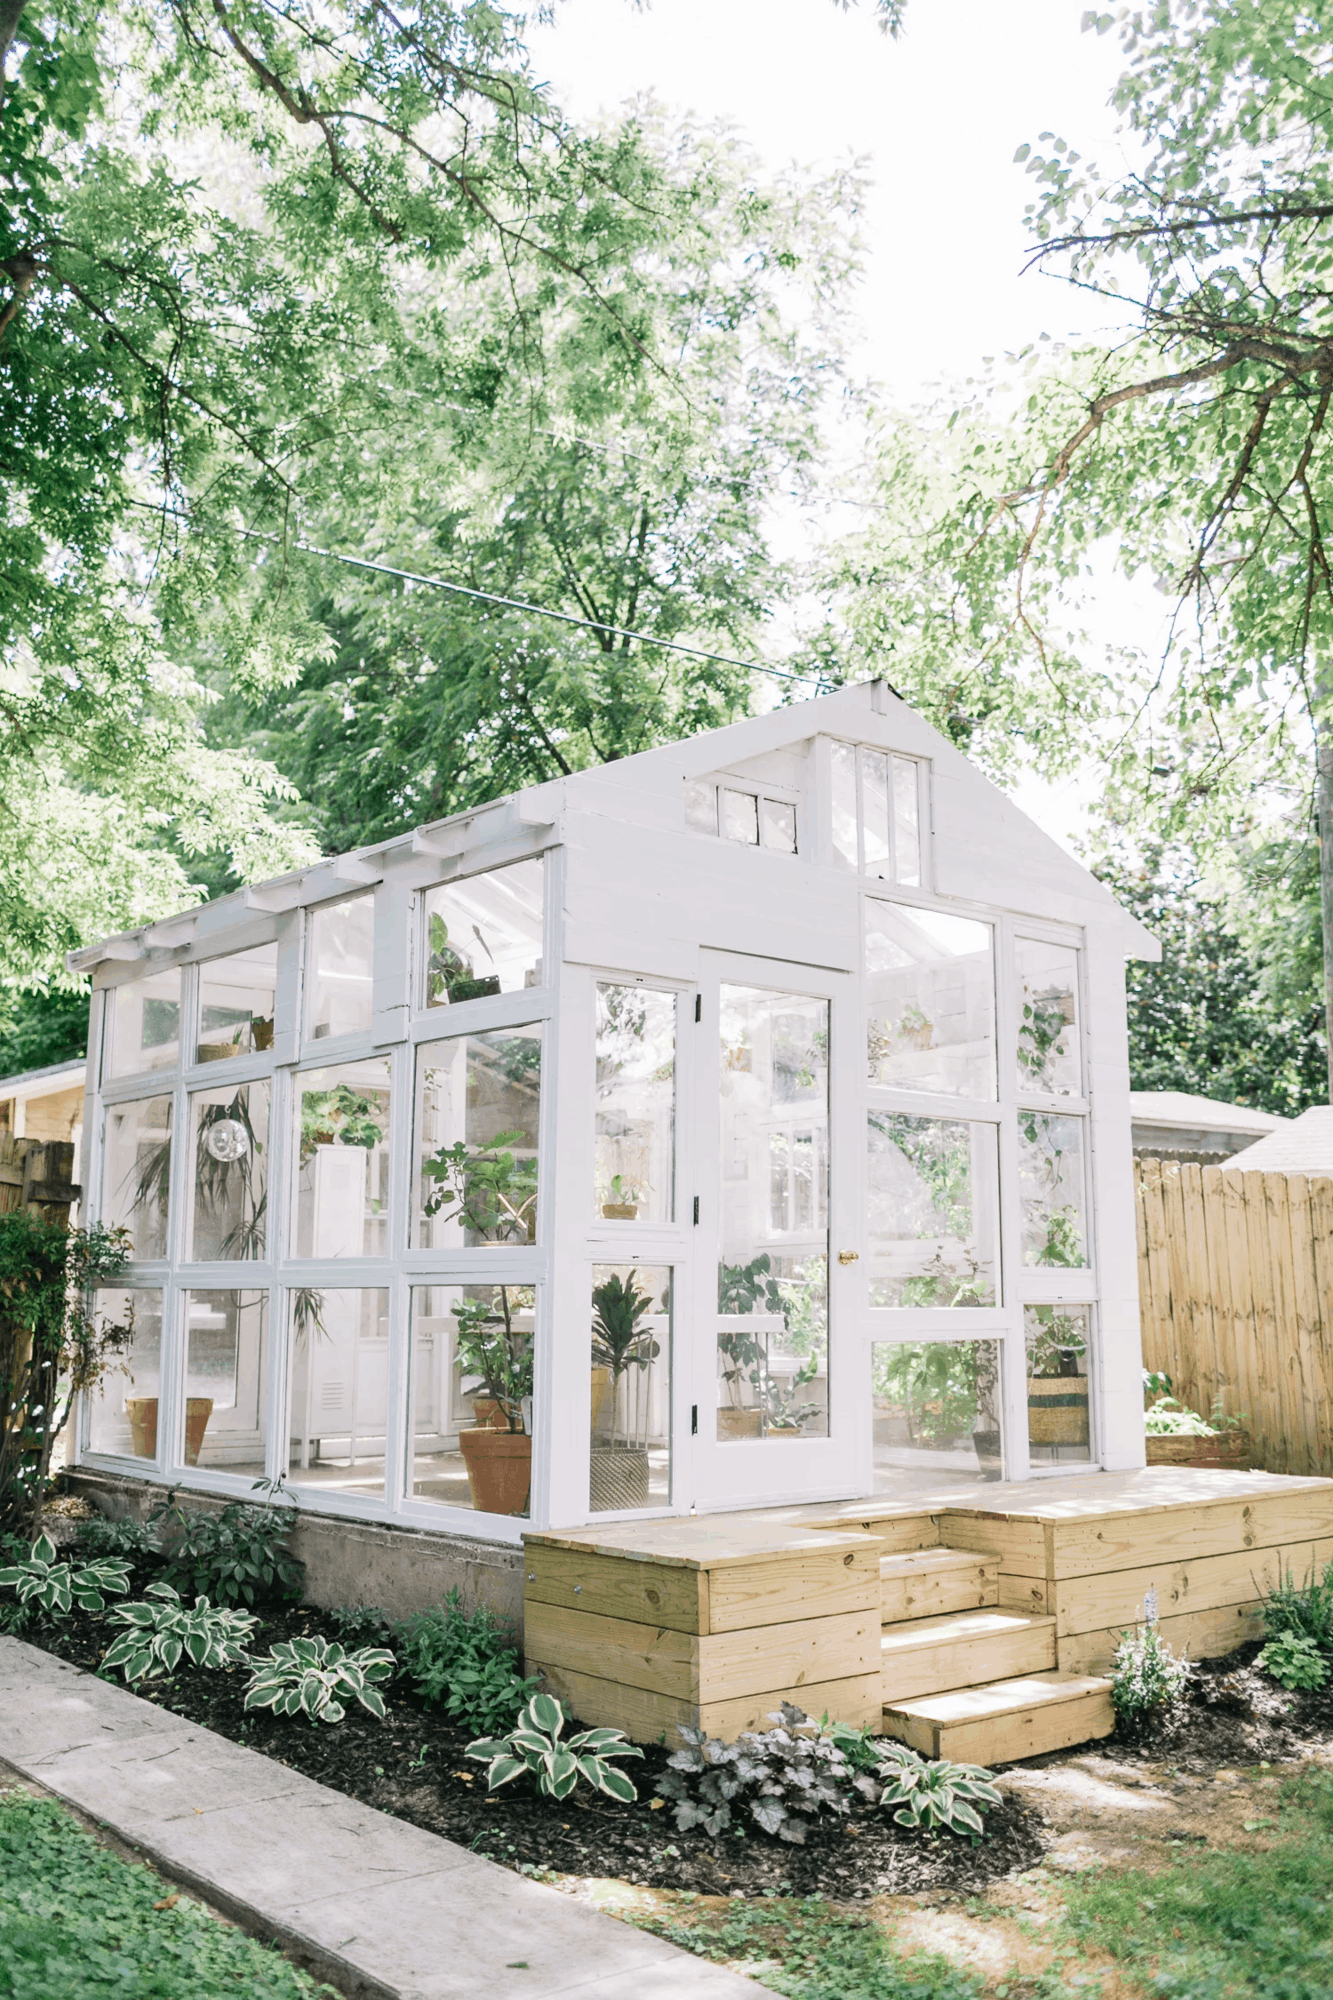 https://abeautifulmess.com/wp-content/uploads/2019/07/How-to-build-a-greenhouse.png